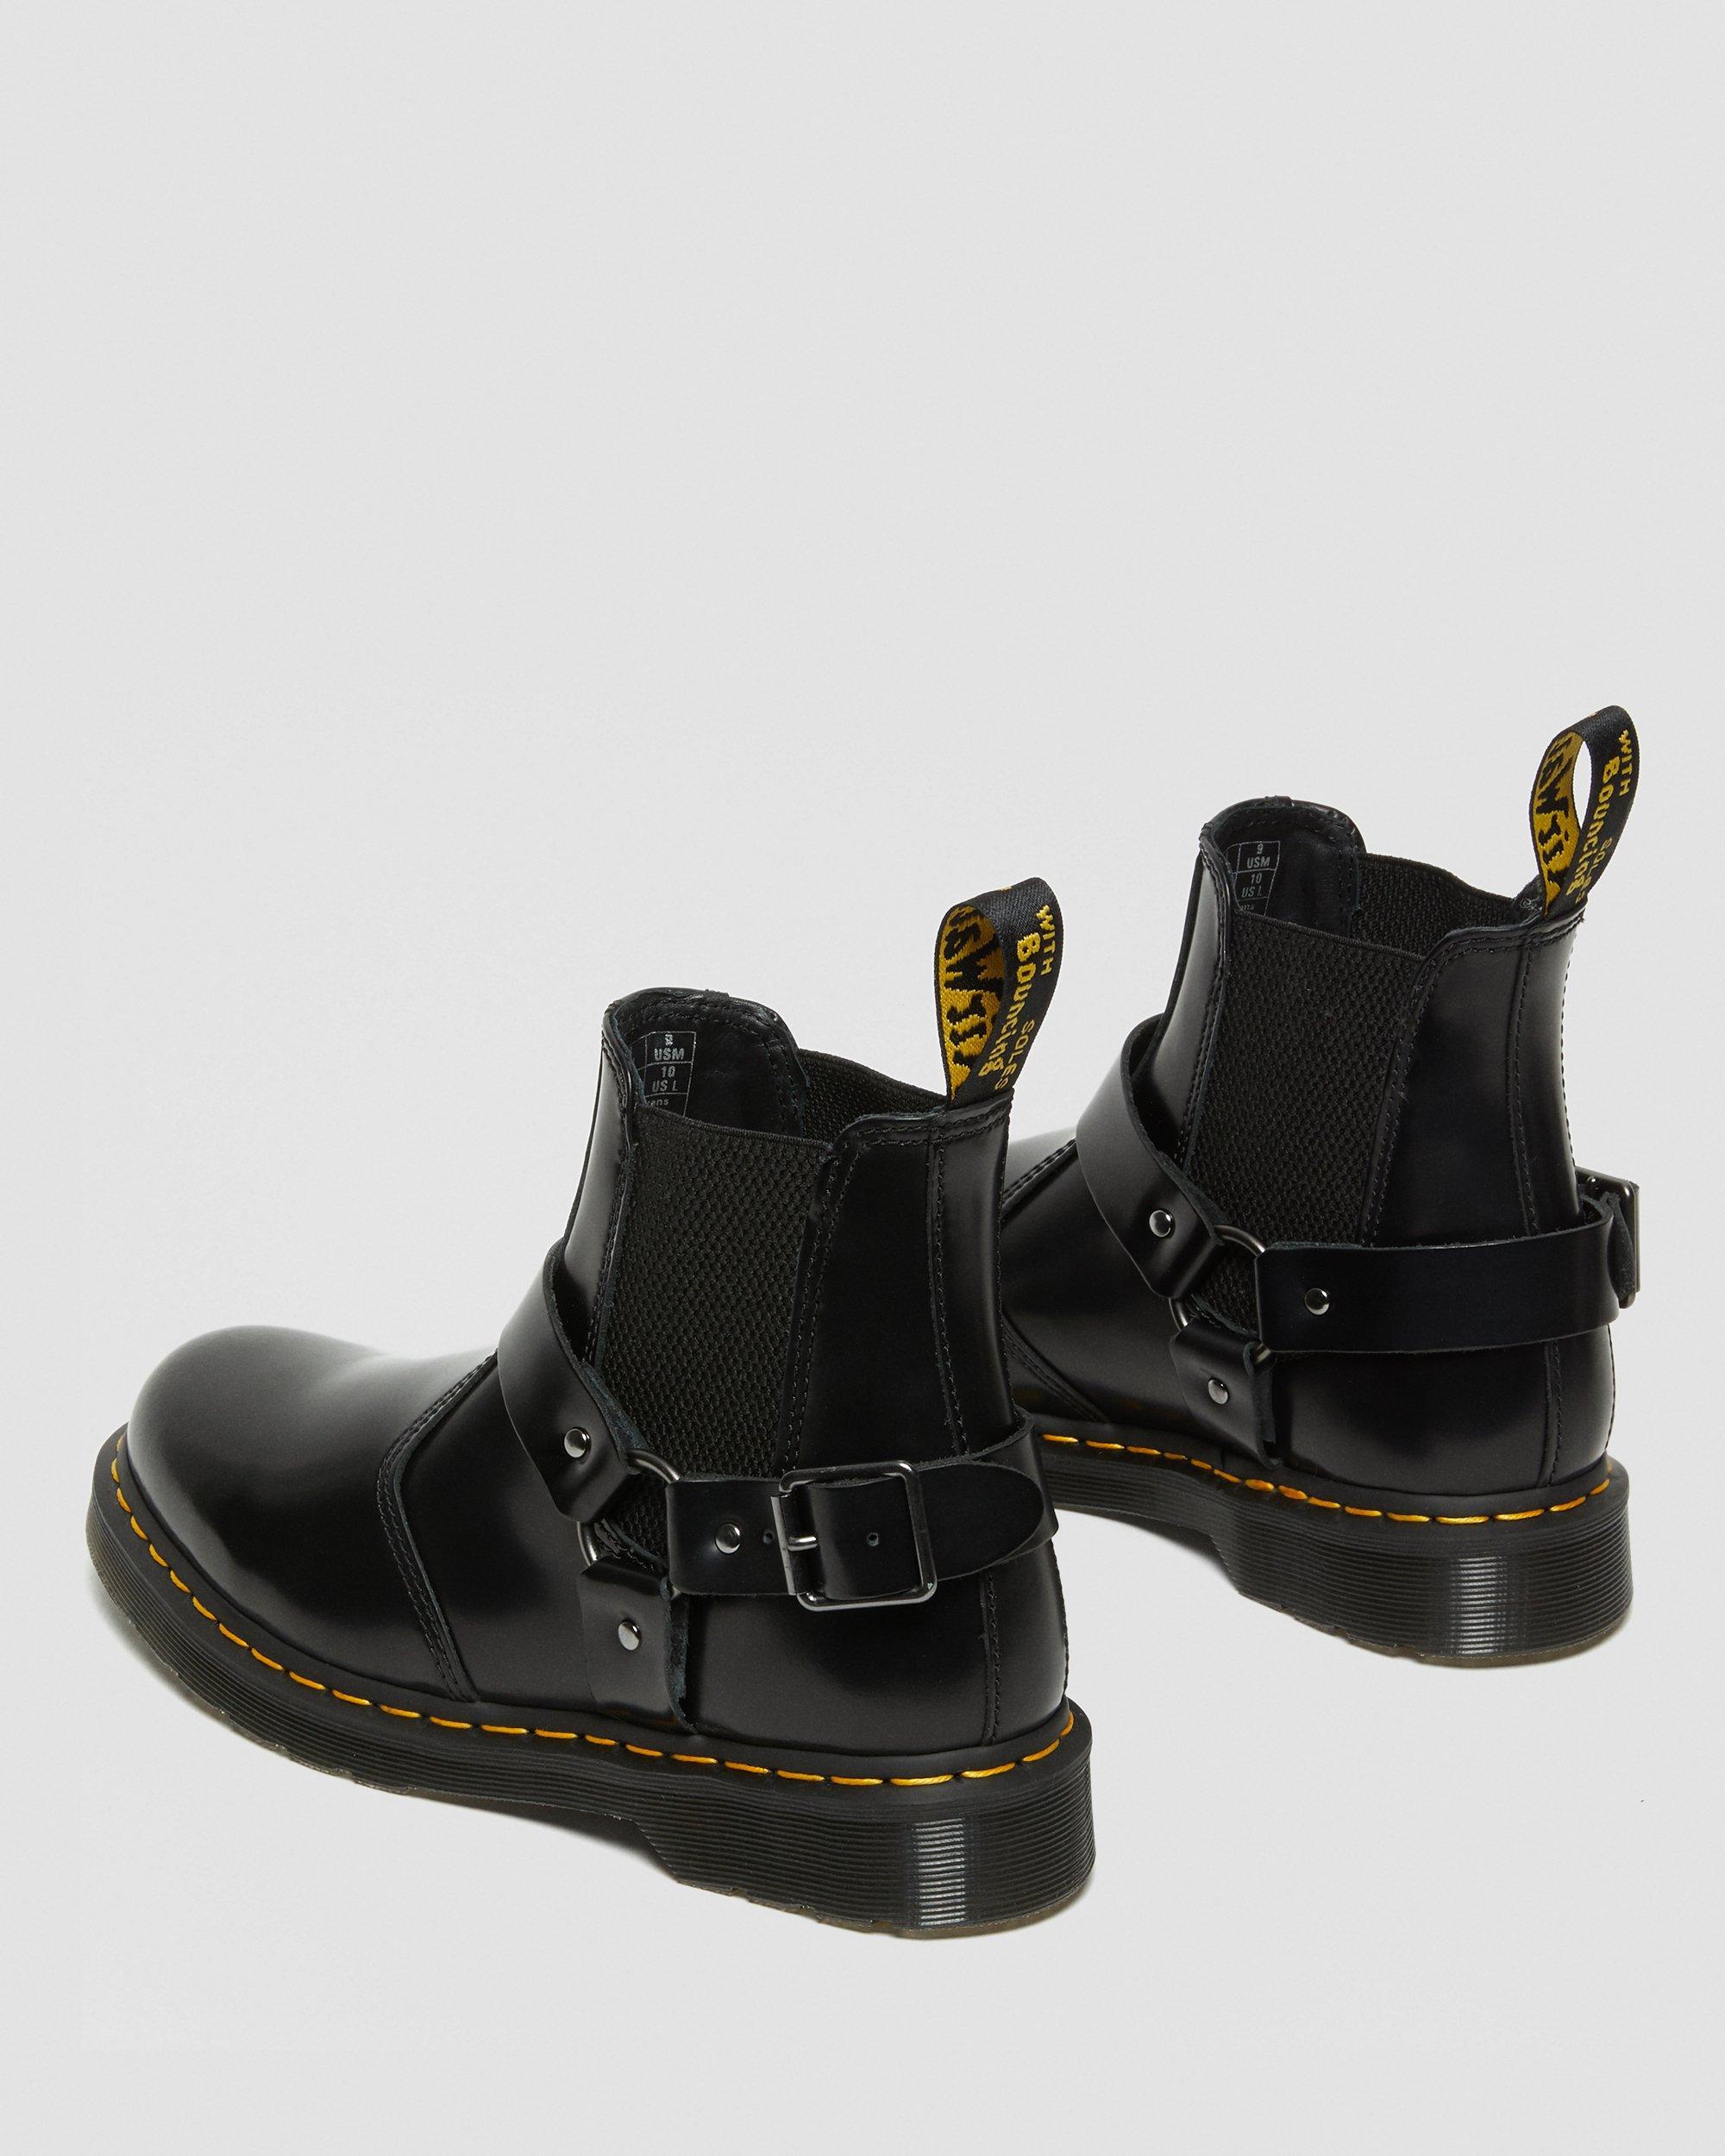 Dr. Martens Wincox Smooth Leather Buckle Boots in Black | Lyst